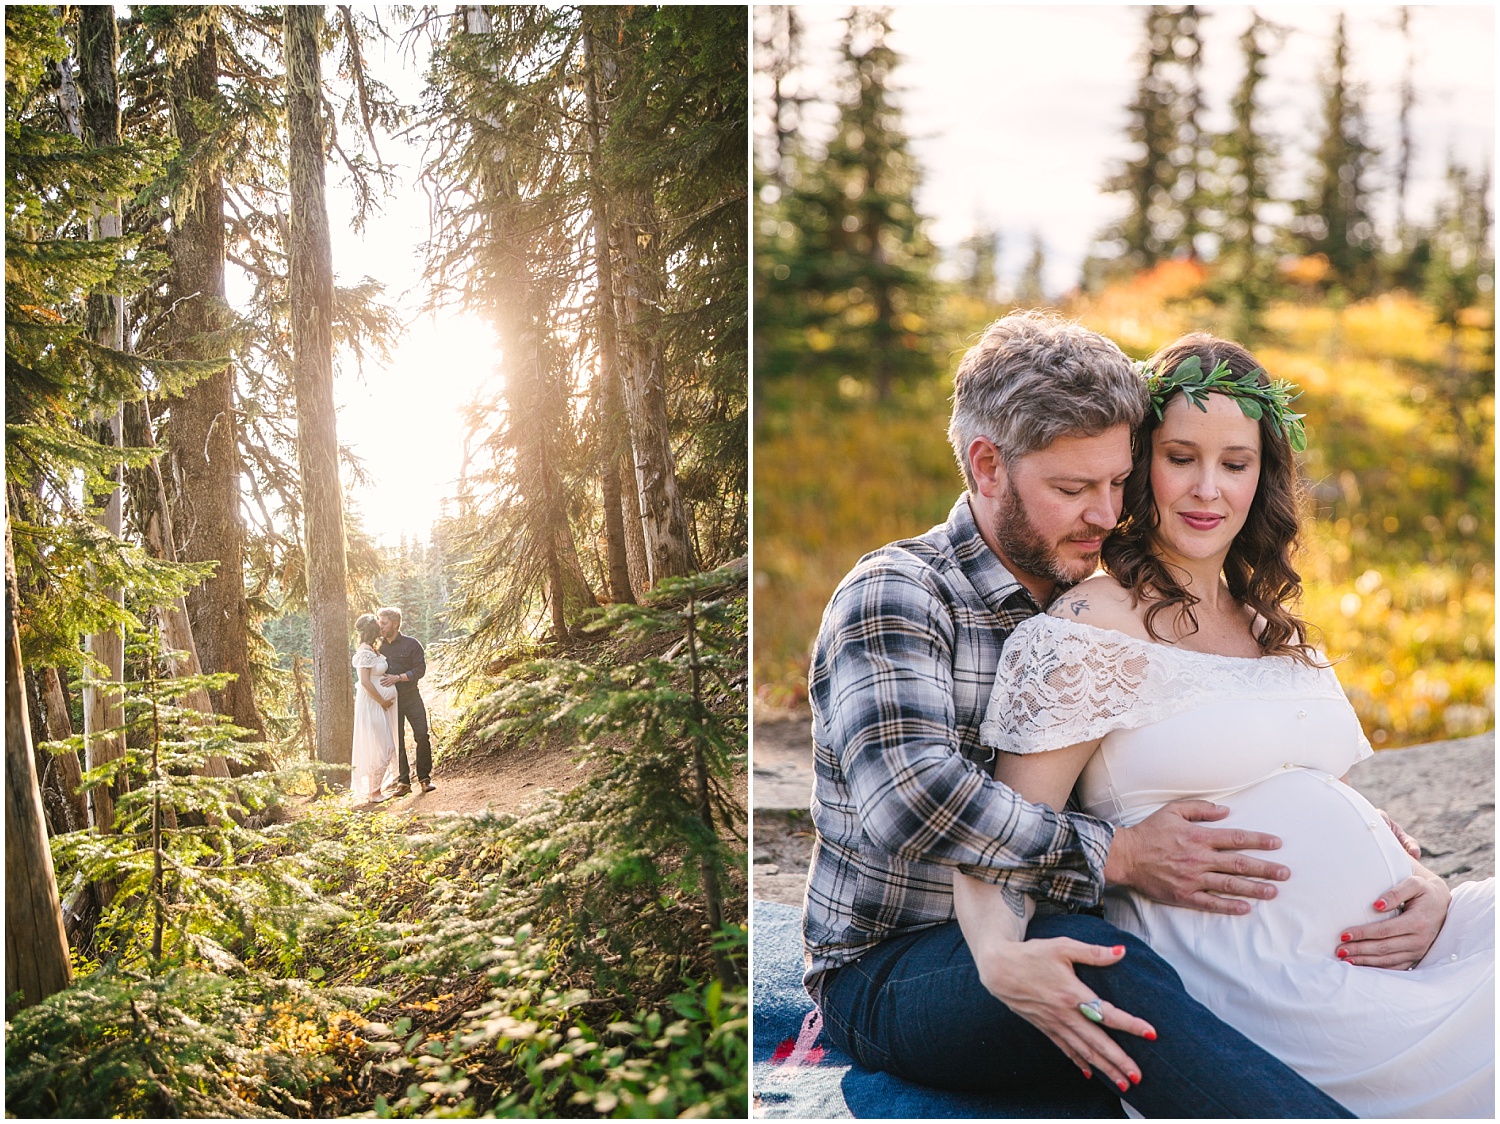 Expectant couple standing in a forest for fall maternity pictures at Mount Rainier National Park